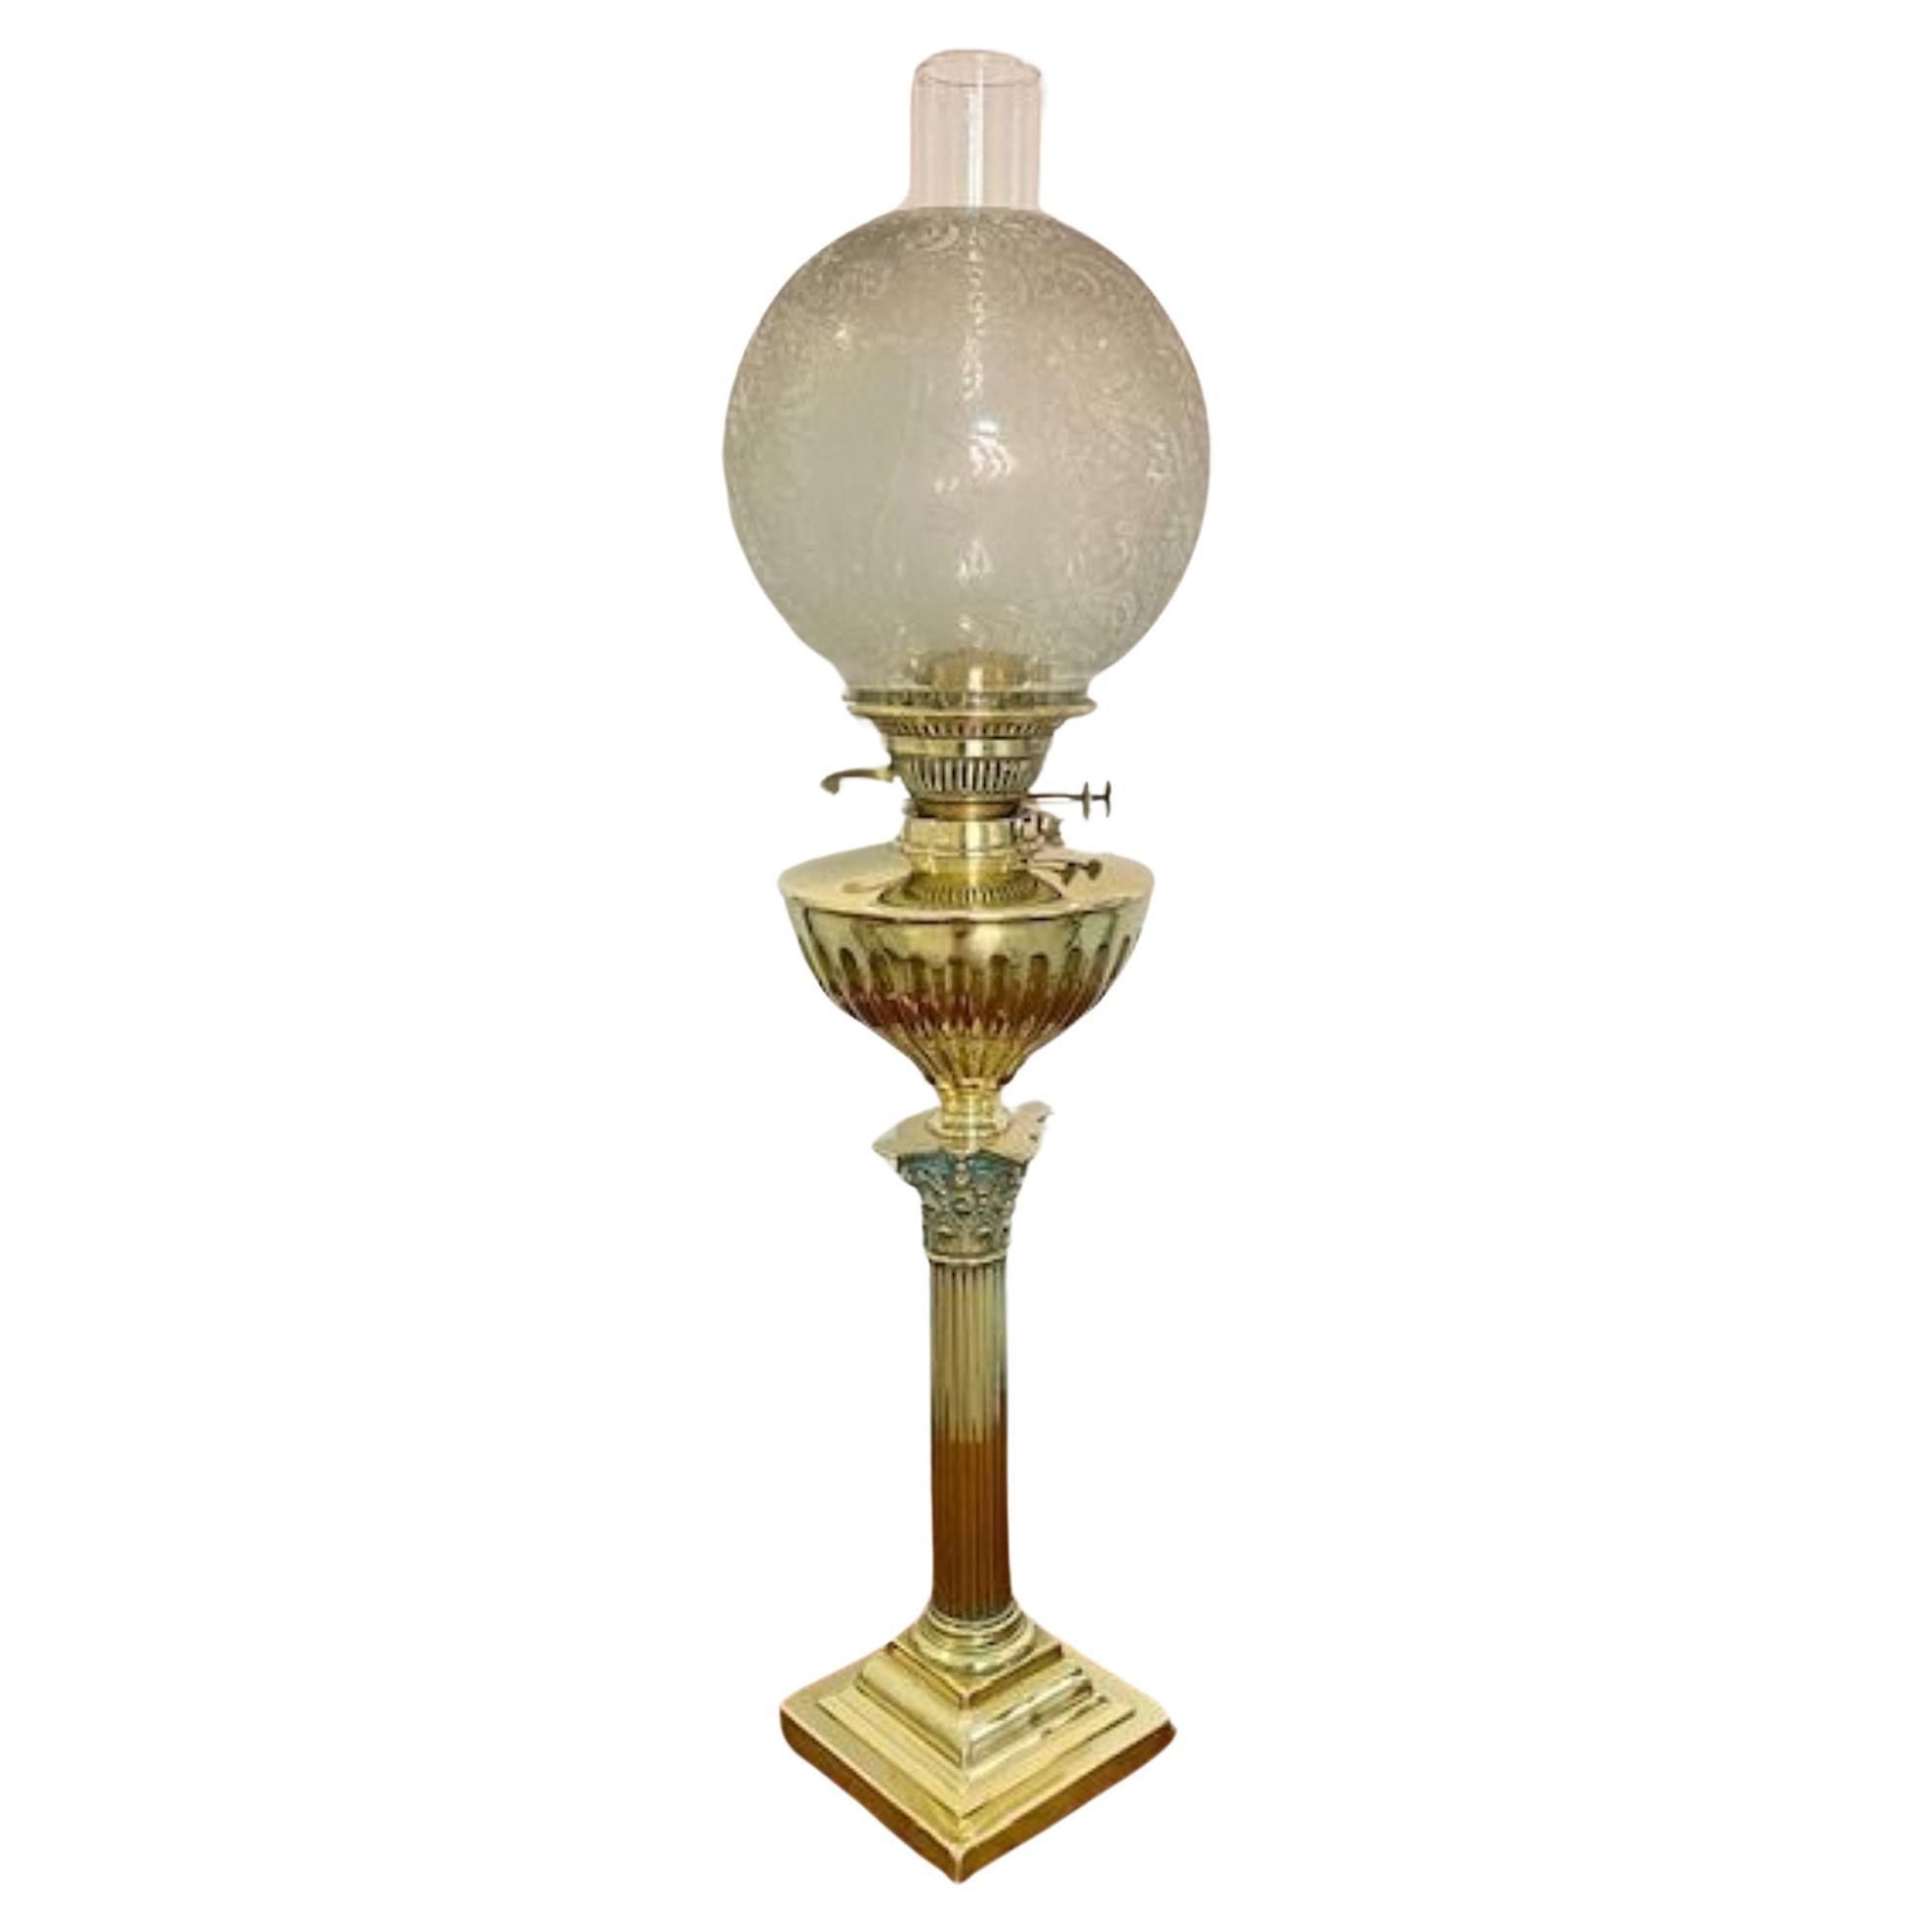 Quality antique Victorian brass oil lamp